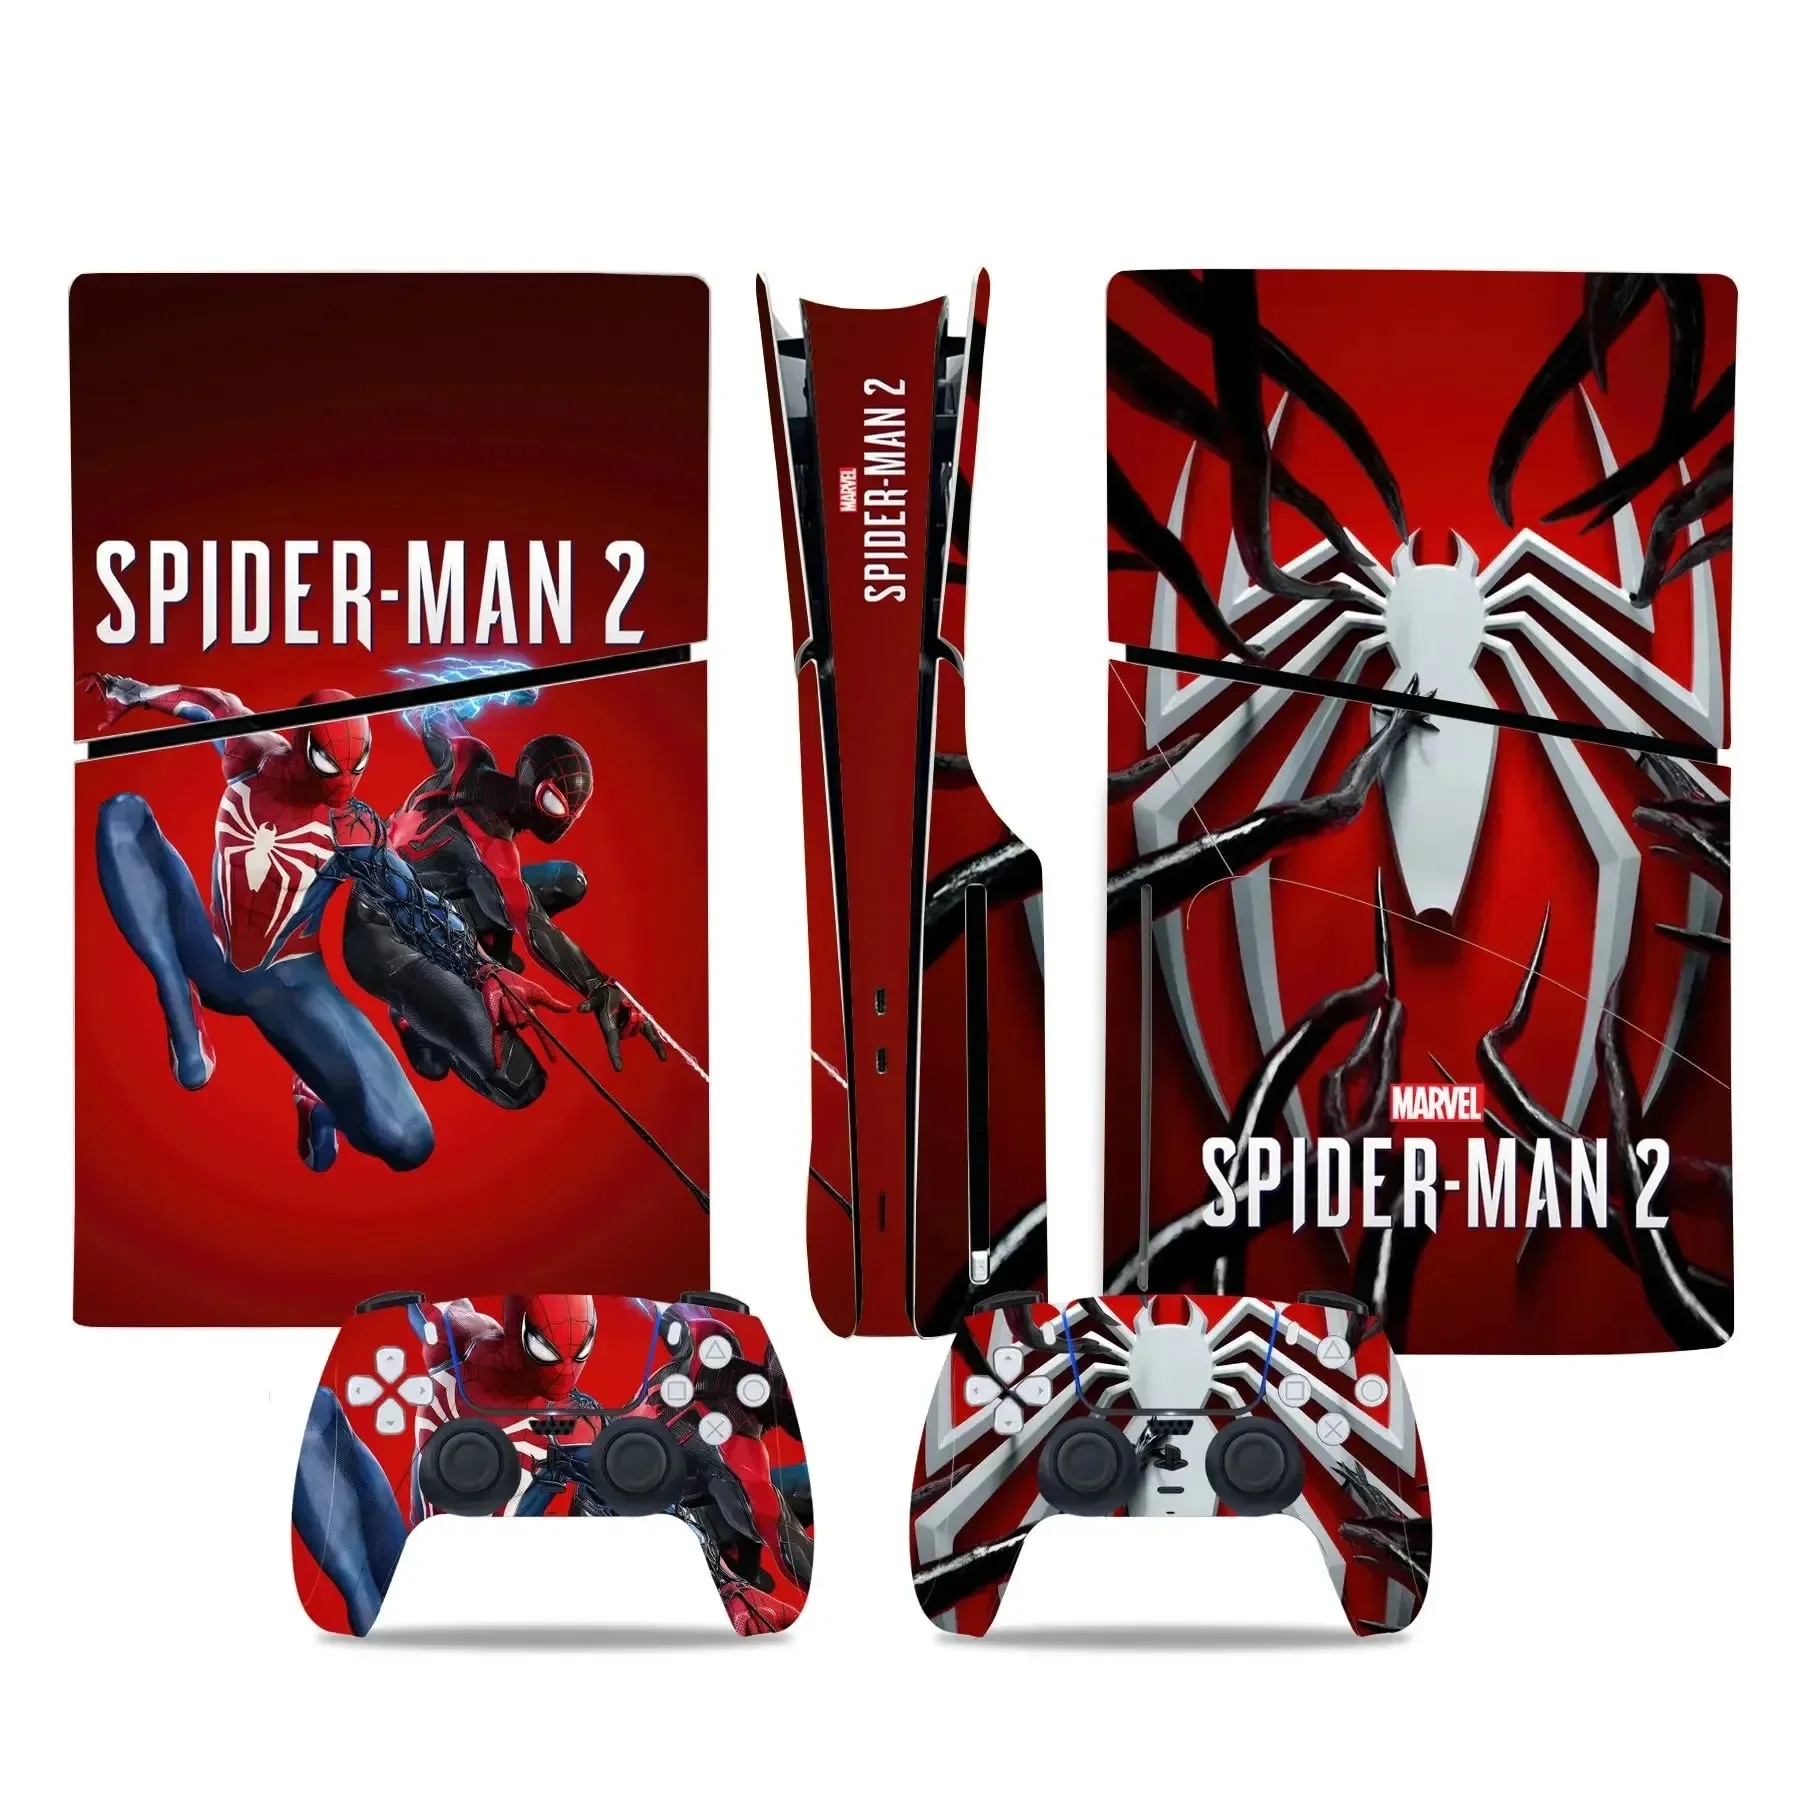 【HOT SALE】 Spiderman 2 Ps5 Film Skin Sticker For Ps5 Disk Version Skin Sticker Console And 2 Controllers Ps5 Disk Version Sticker